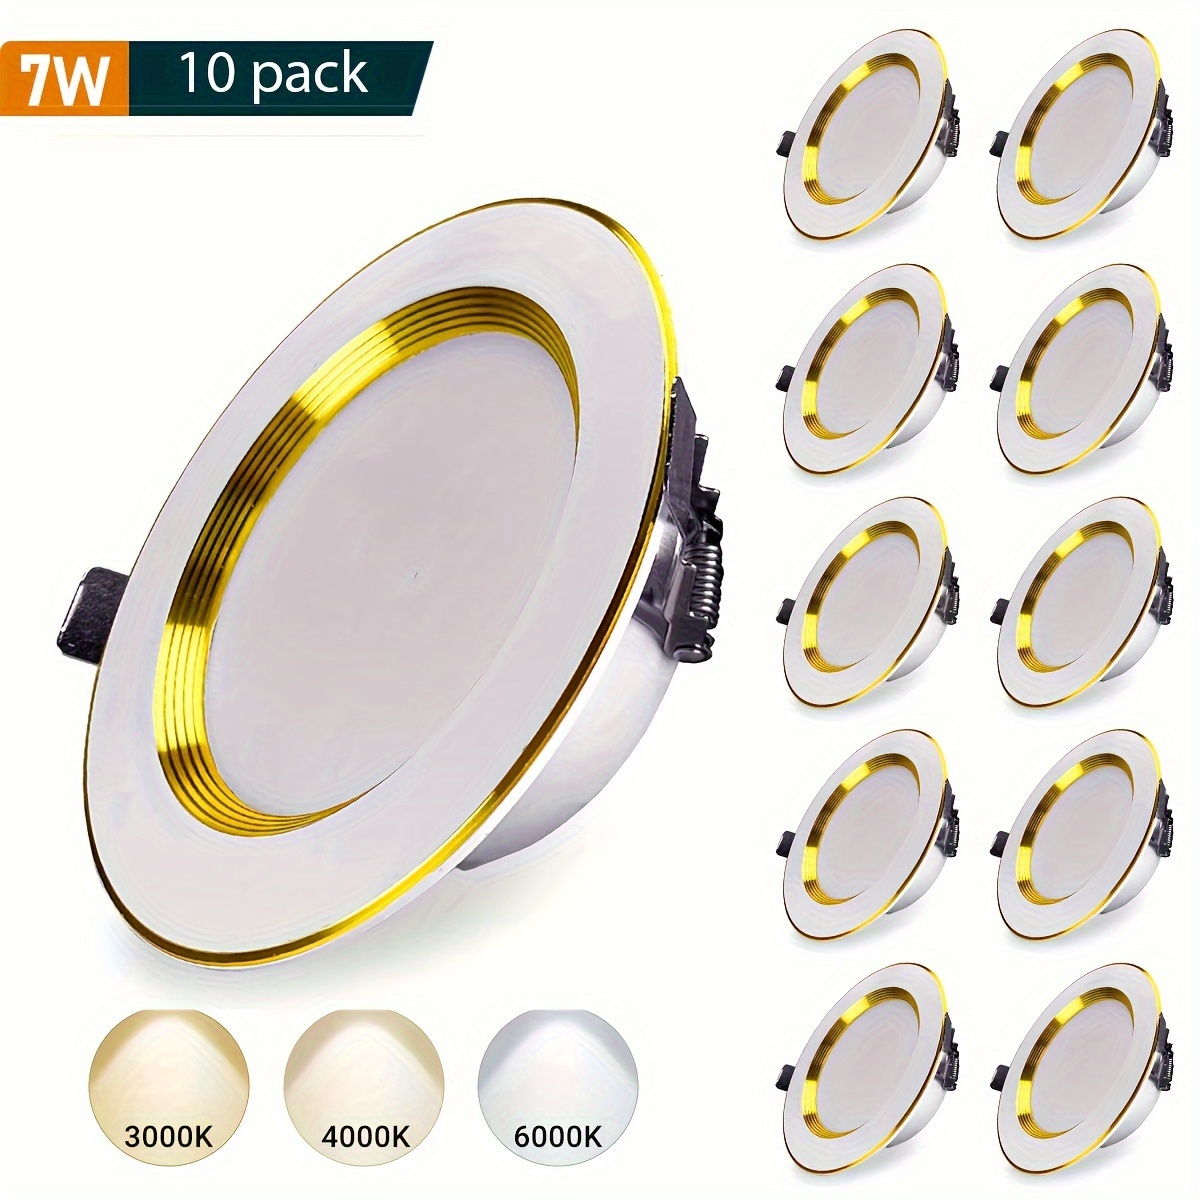 

10 Pack Downlight Led, 4 Inch Baffle Trim, Dimmable, 7w=60w, 3000k/4000k/6000k 3 Color Dimming, 650 Lm, Damp Rated, Easy Retrofit Installation -no Flicker